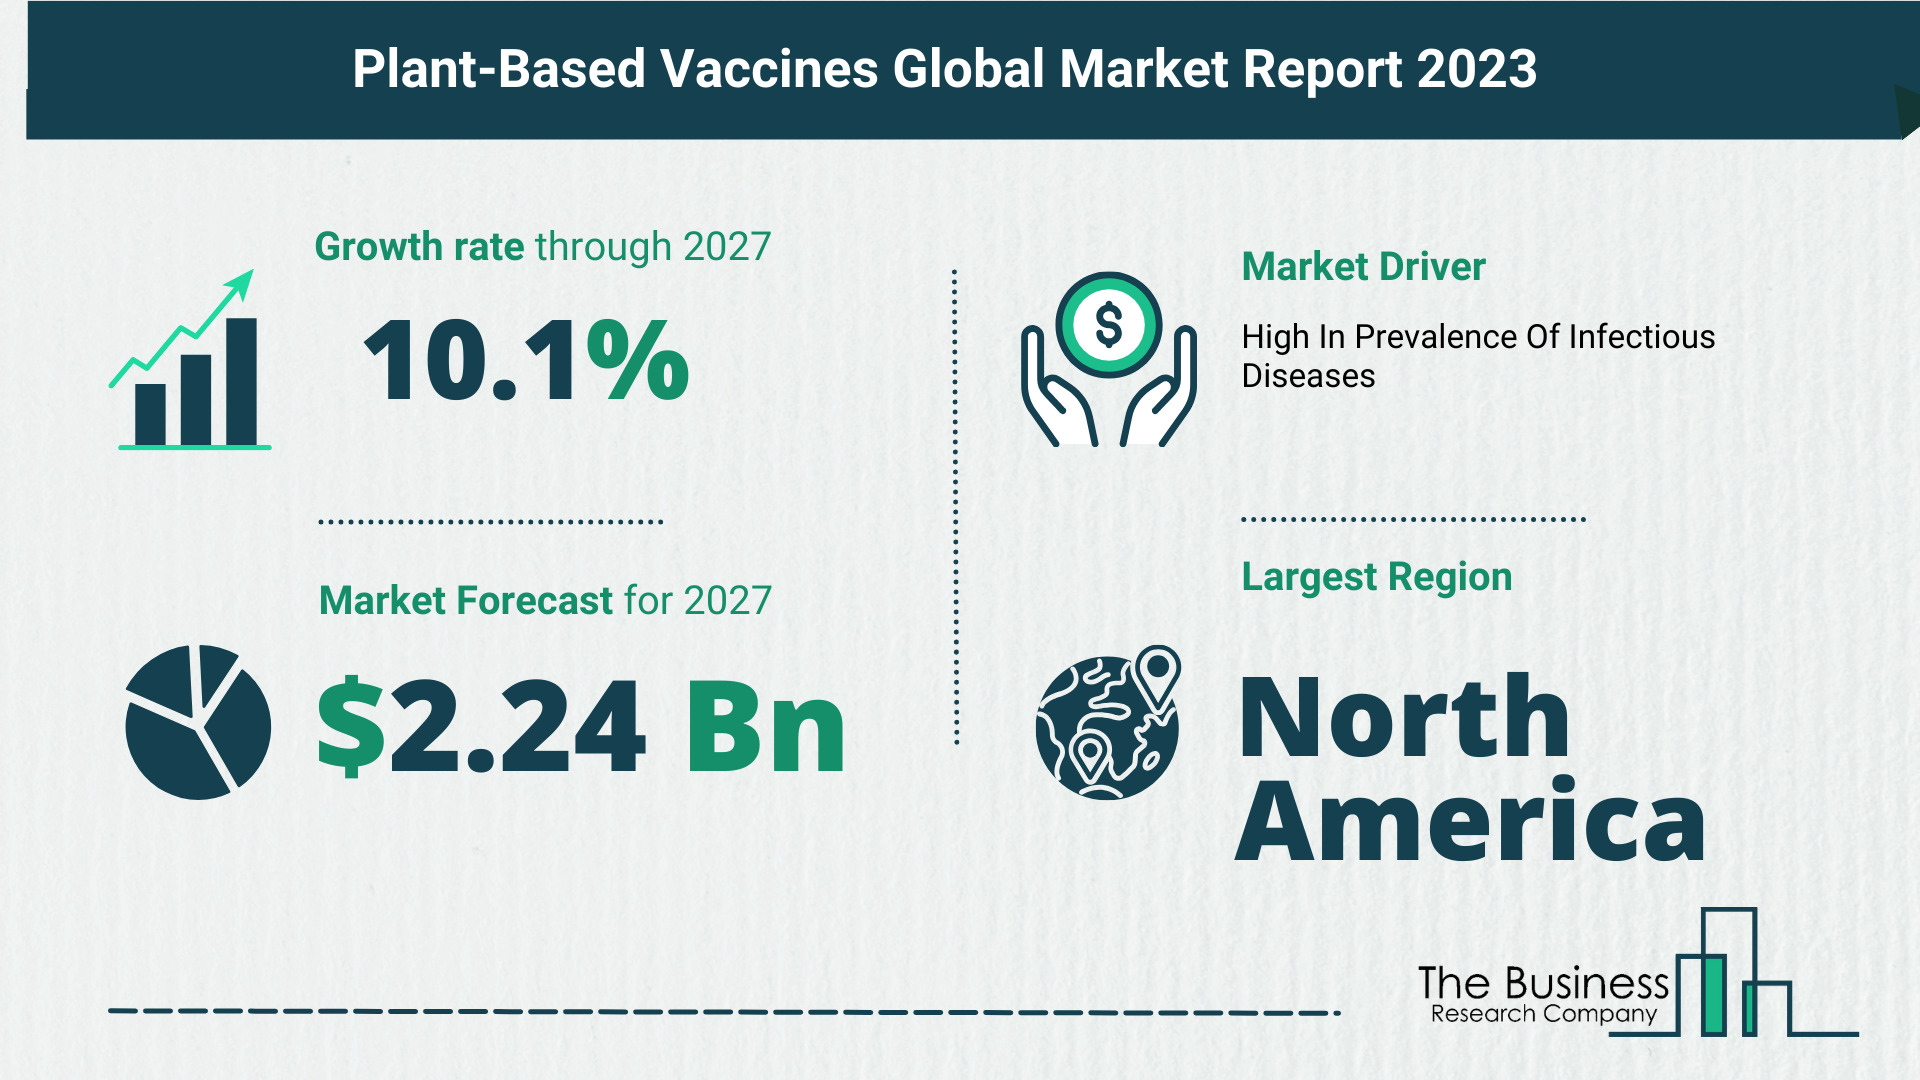 Global Plant-Based Vaccines Market Analysis 2023: Size, Share, And Key Trends